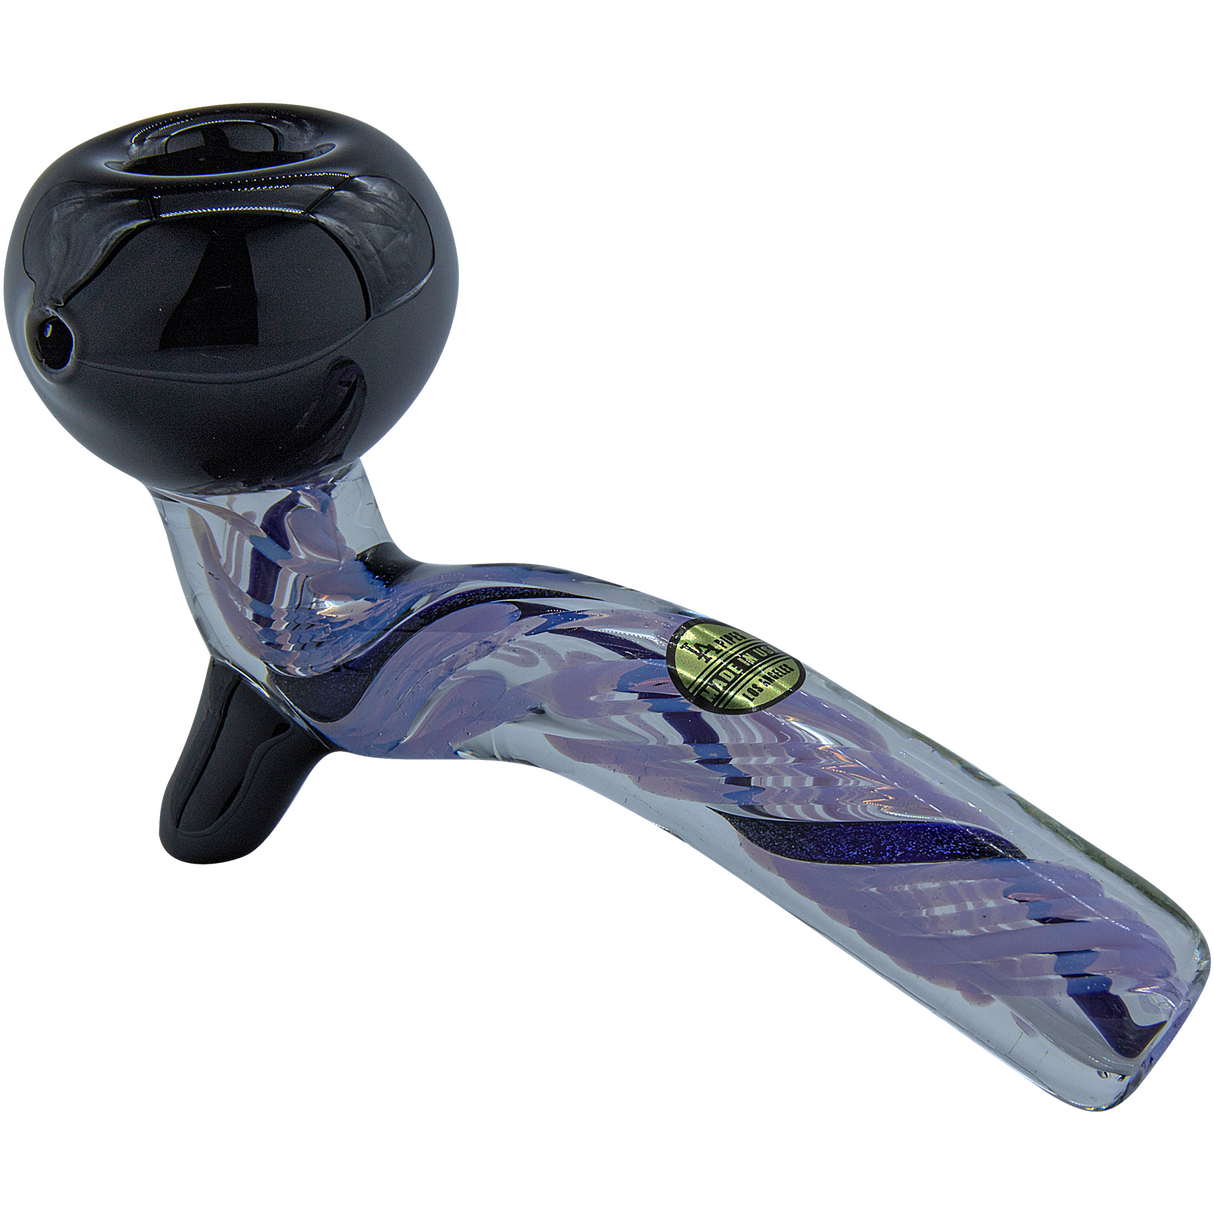 LA Pipes "Galactic Storm" Slime & Dichro Sherlock Pipe in Purple Slime Variant, Angled Side View